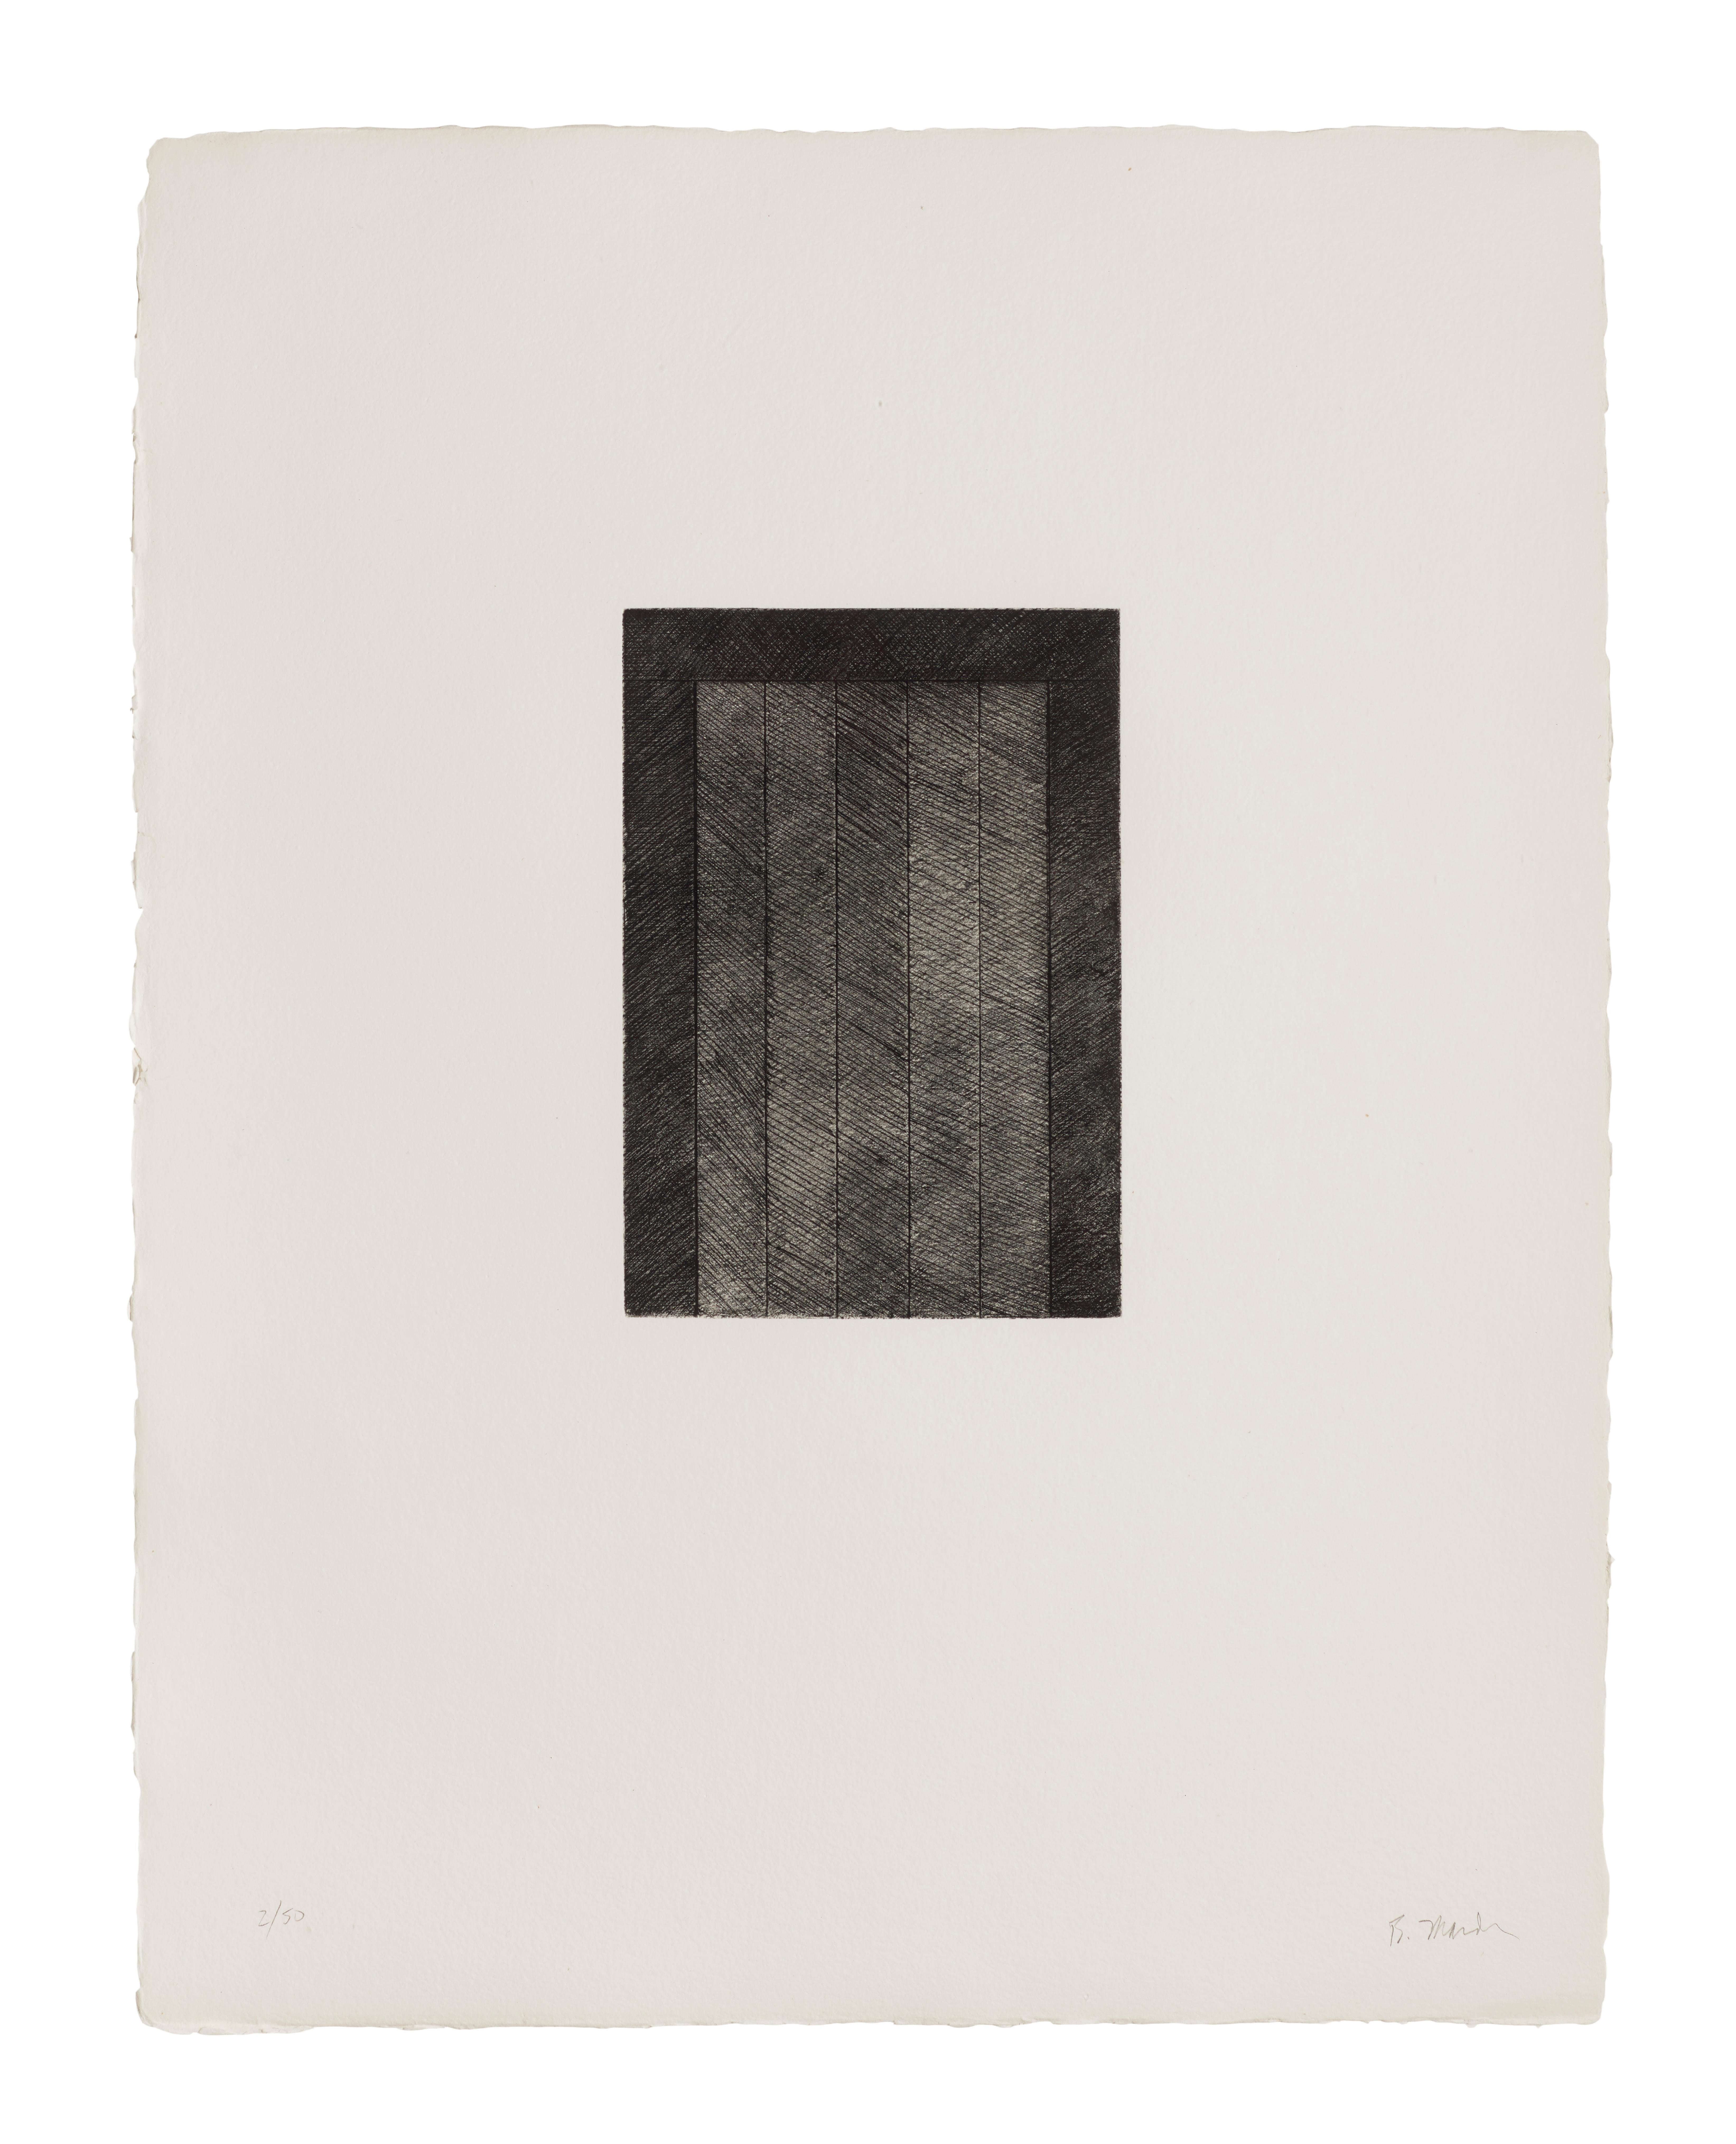 Brice Marden Abstract Print - 12 Views for Caroline Tatyana: one plate (H)